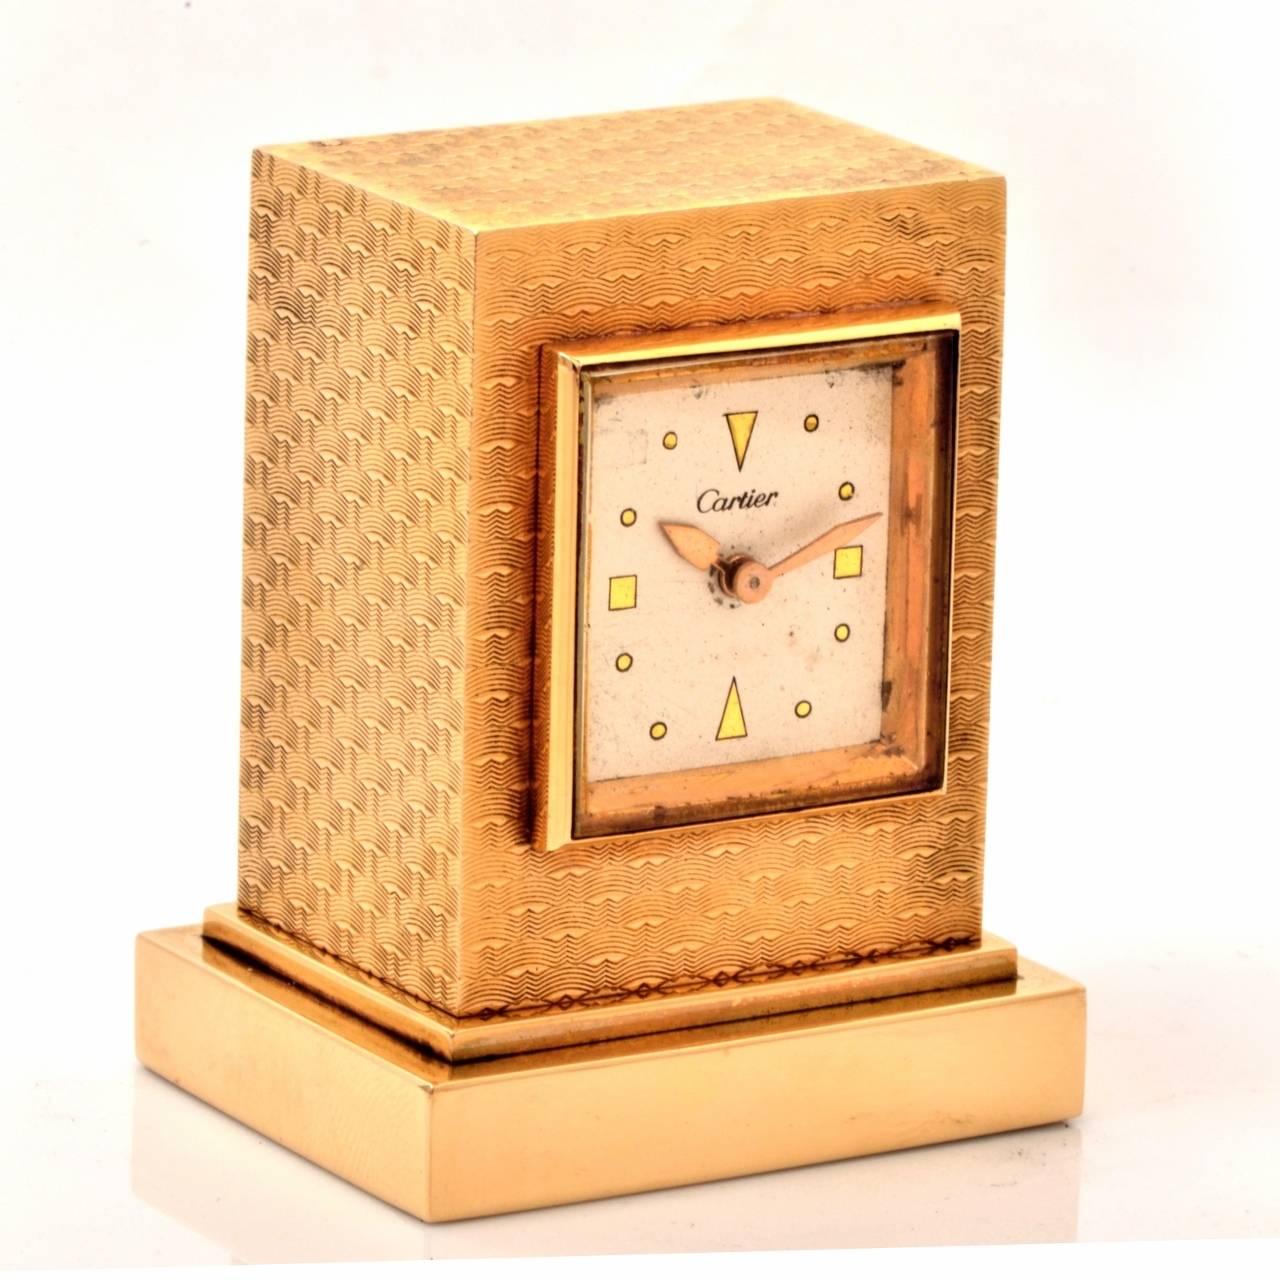 This aesthetically captivating authentic circa 1950 Cartier eight-day desk clock is made  with solid 14K yellow gold case. It is rendered in artfully textured gold, adding a glittering aspect to the case. The white dial features arrow hands and is